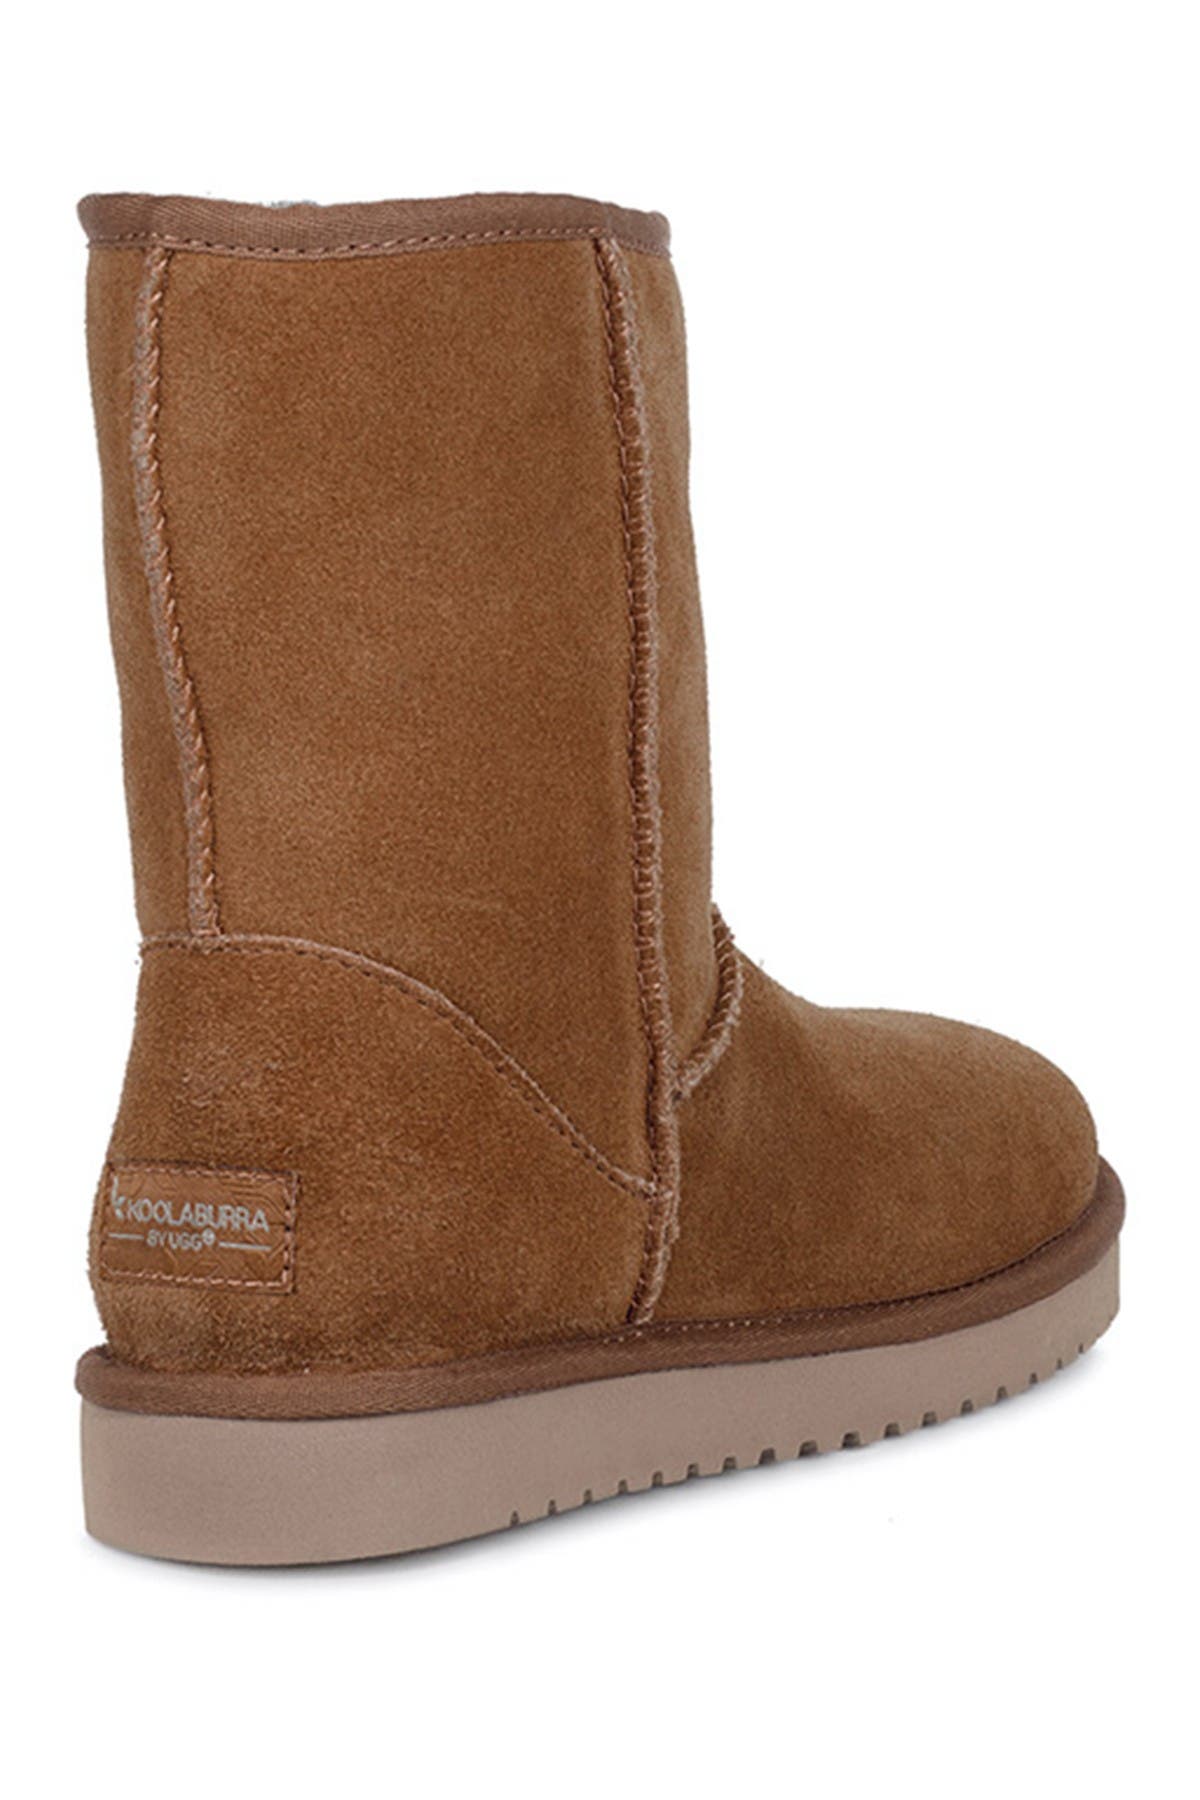 does ugg make wide width boots